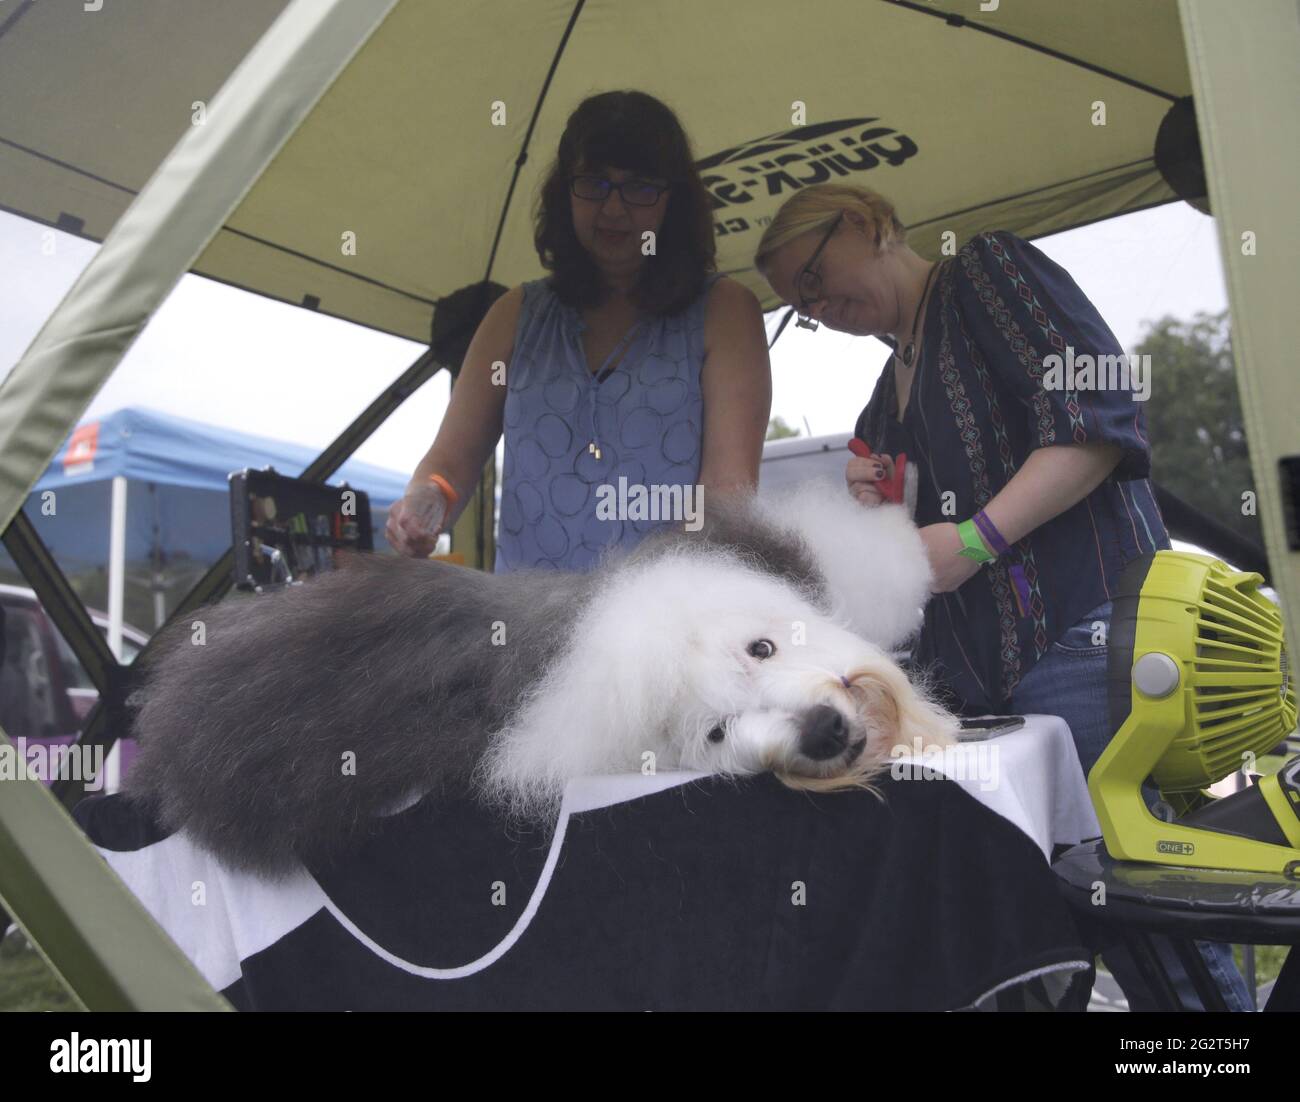 Tarrytown, United States. 12th June, 2021. An Old English Sheepdog gets groomed in the benching area at the 145th annual Westminster Kennel Club Dog Show at the Lyndhurst Estate in Tarrytown, New York on Saturday, June12, 2021. This years Westminster Dog Show was delayed due to COVID-19 and next years competition will return again to Madison Square Garden. Photo by John Angelillo/UPI Credit: UPI/Alamy Live News Stock Photo